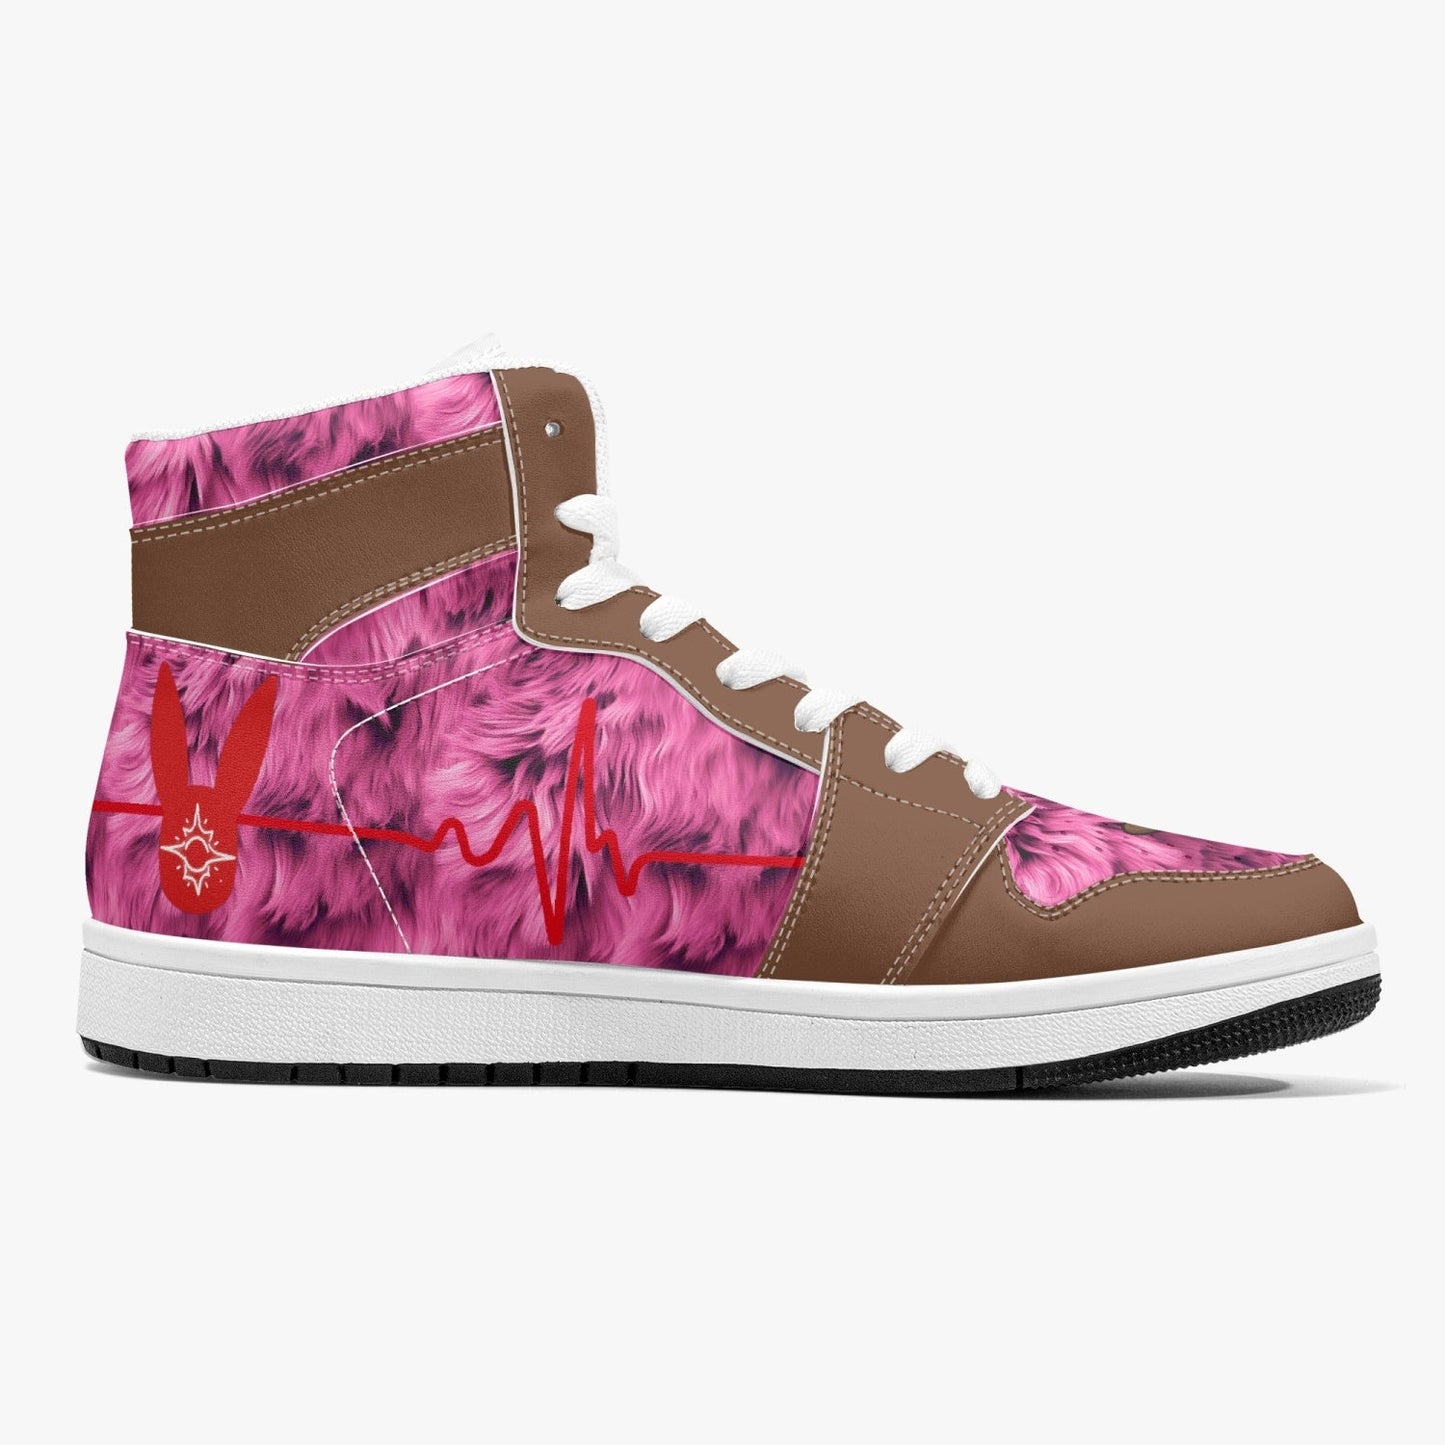 Heartbeat Rhythm in ILY Signs - High-Top Leather Sneakers (Chocolate: Woman)